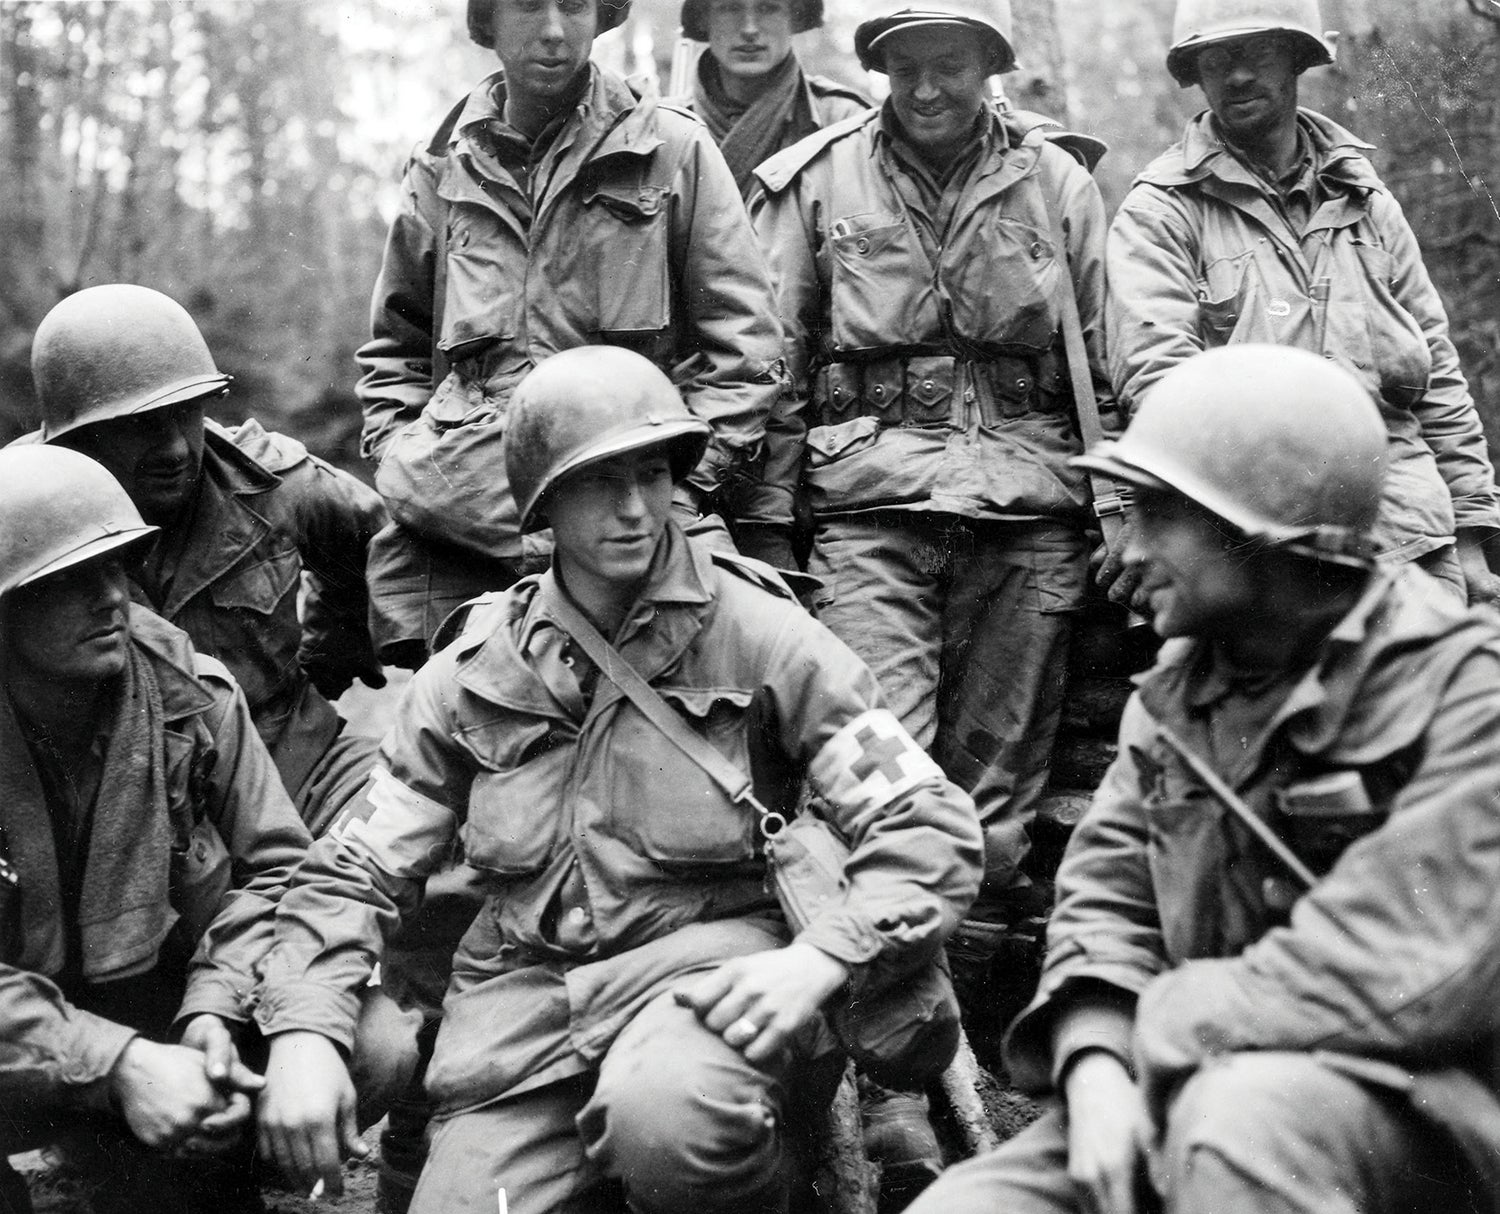 Soldiers from the 313th Infantry Regiment, 79th Infantry Division, regroup after a fierce battle near Lauterbourg, France, in December 1944. (Credit: National Archives)